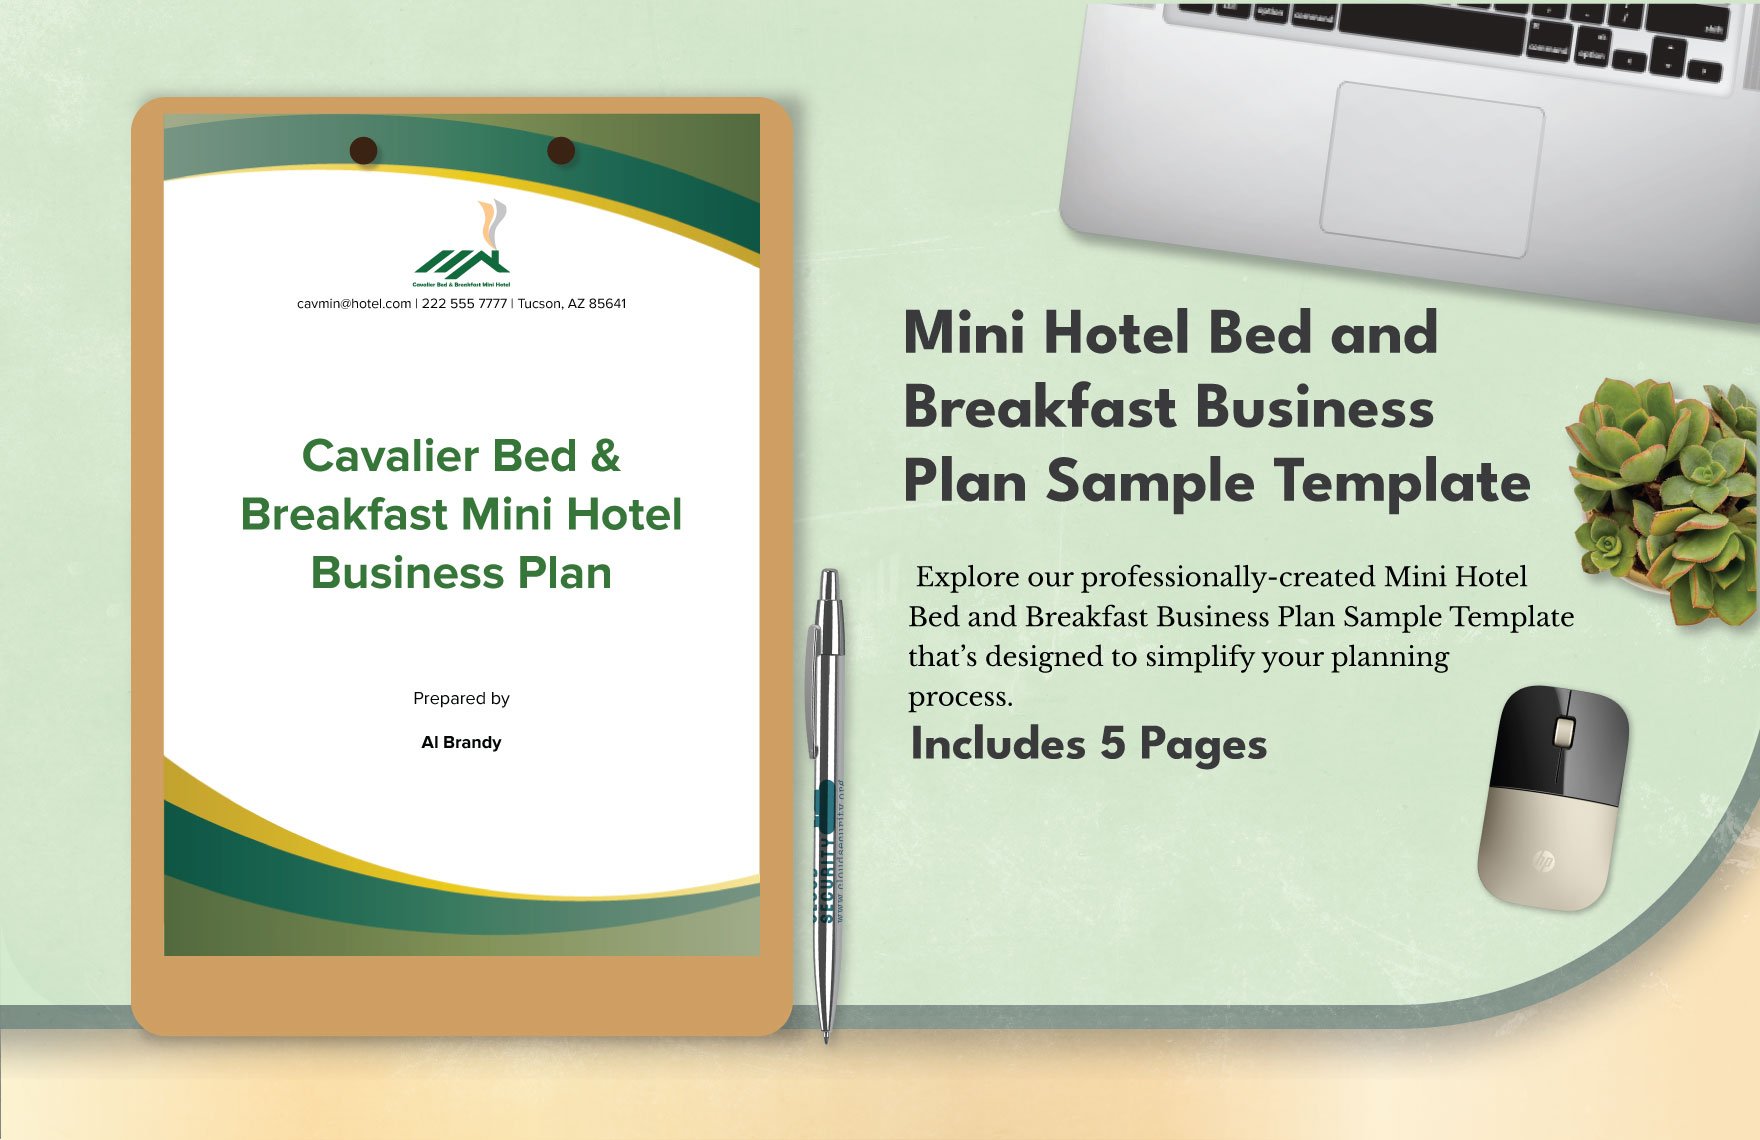 Mini Hotel Bed and Breakfast Business Plan Sample Template